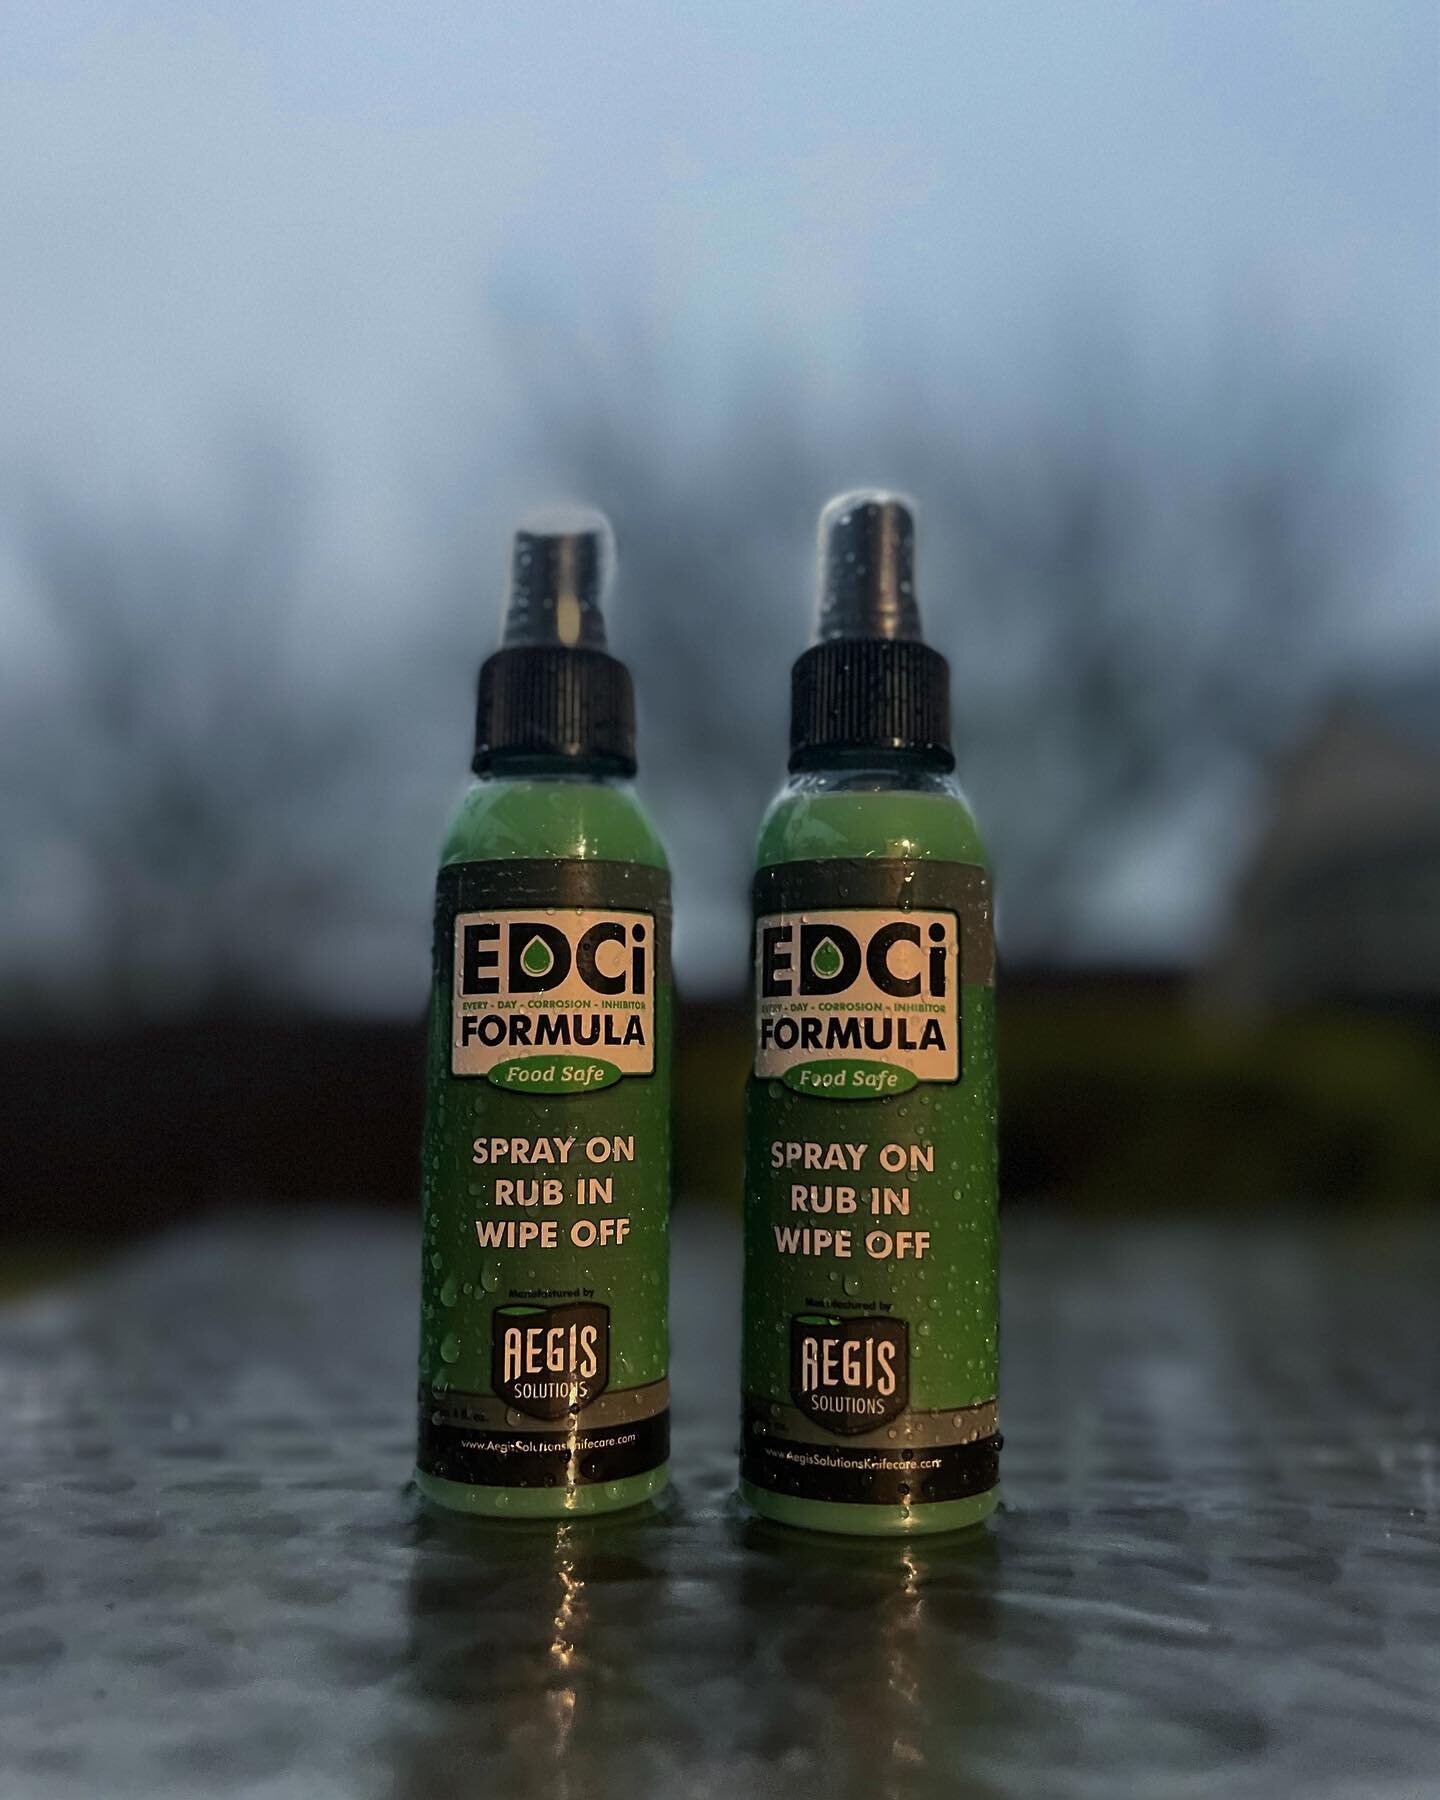 Even in the hard Texas rain, EDCI (our FOOD SAFE easy to use spray) can protect and keep your materials look nice and corrosion-free!! VISIT OUT WEBSITE FOR MORE INFO!!!! 
.EDCI leaves no slimy film, so it&rsquo;s dry to the touch after use!!!
.comes